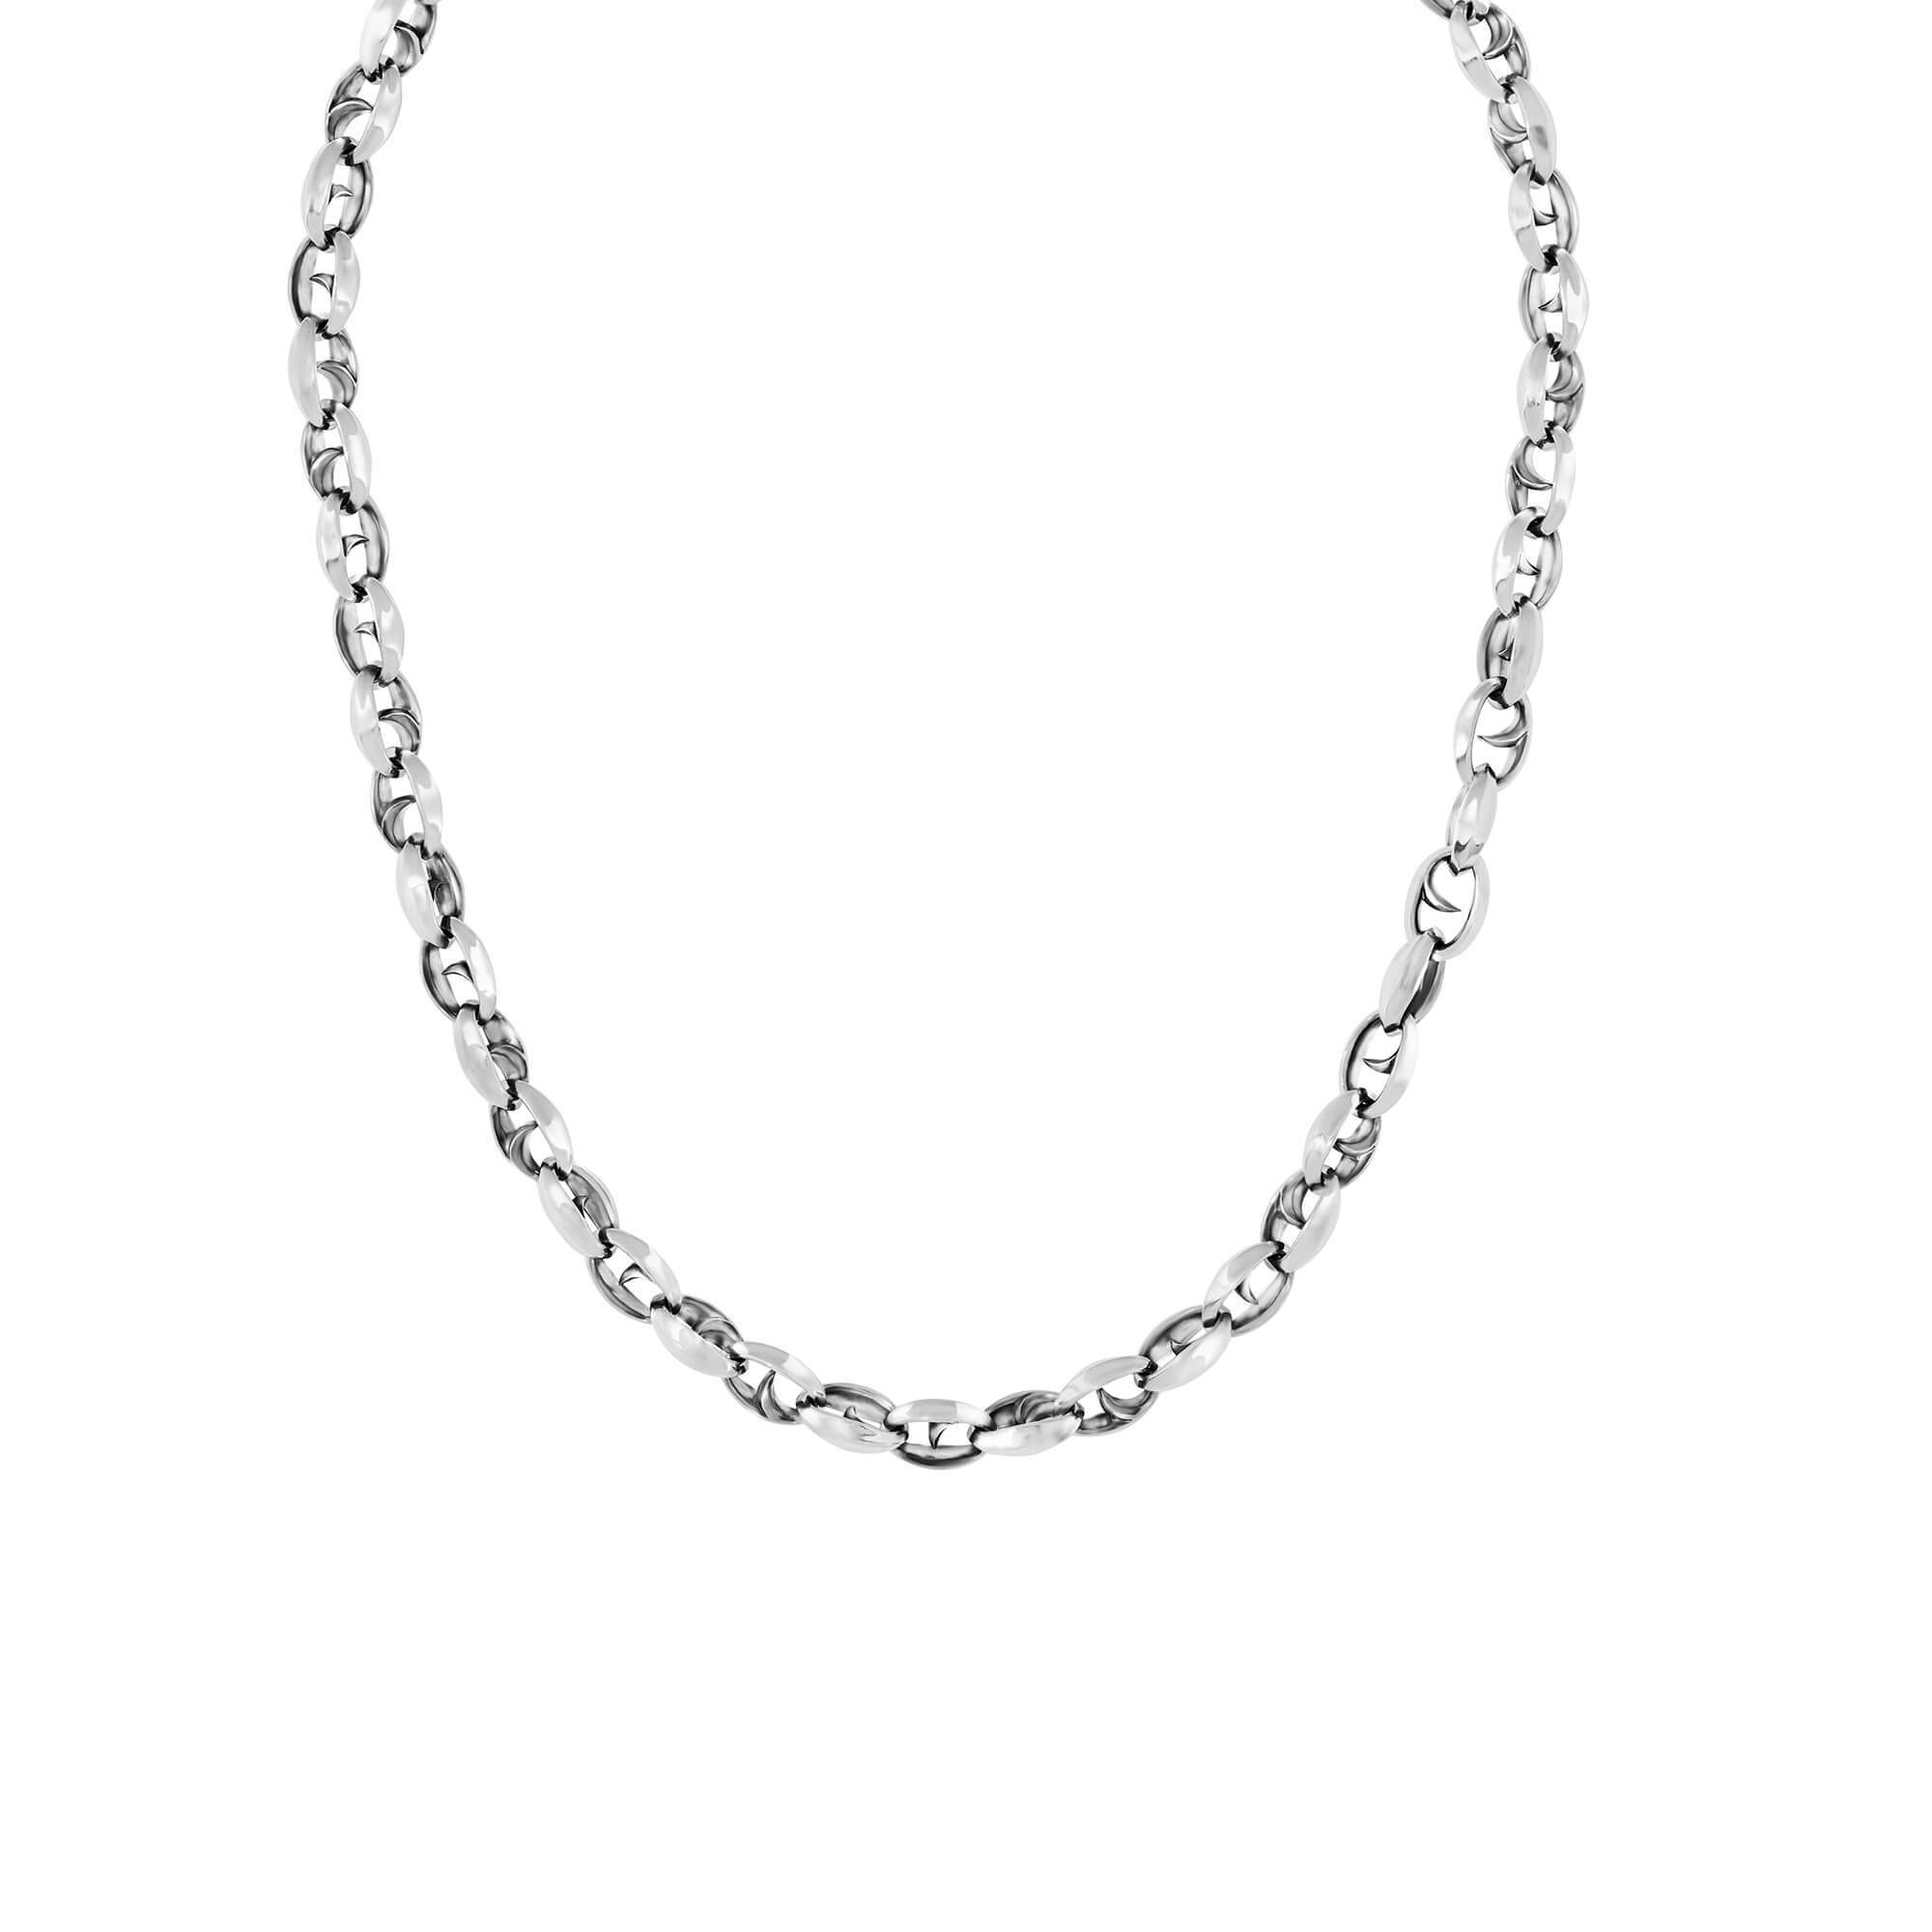 Thorn Addiction Classic Large Link Chain Necklace in Sterling Silver - 24"